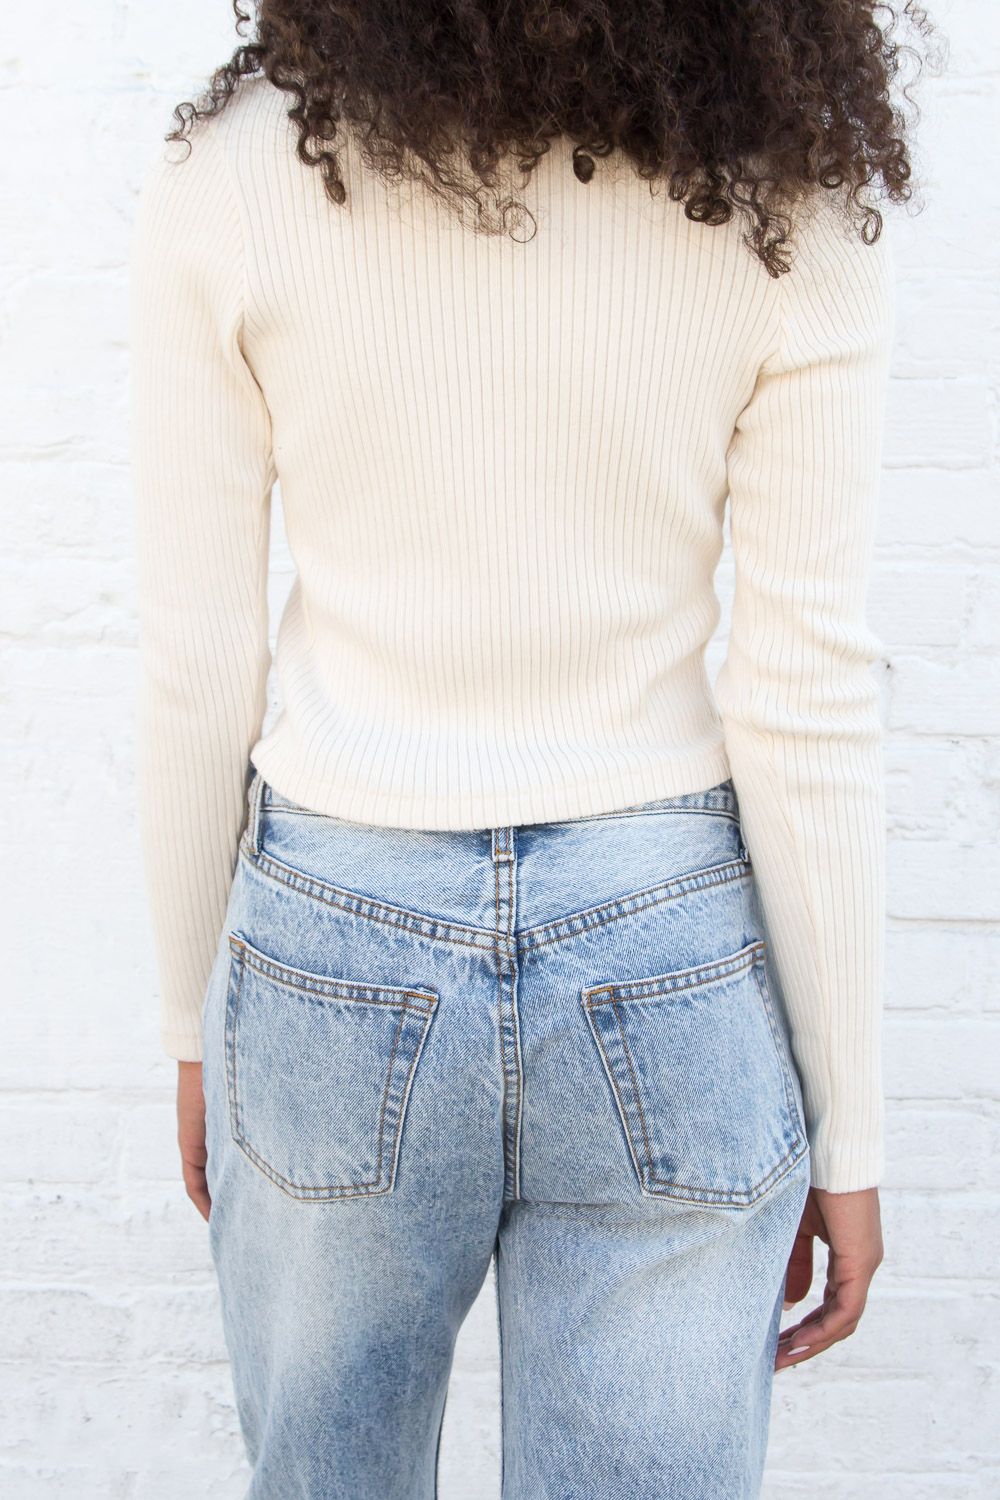 Brandy Melville Delilah Ribbed Top  Ribbed top, Tops, Long sleeve sweater